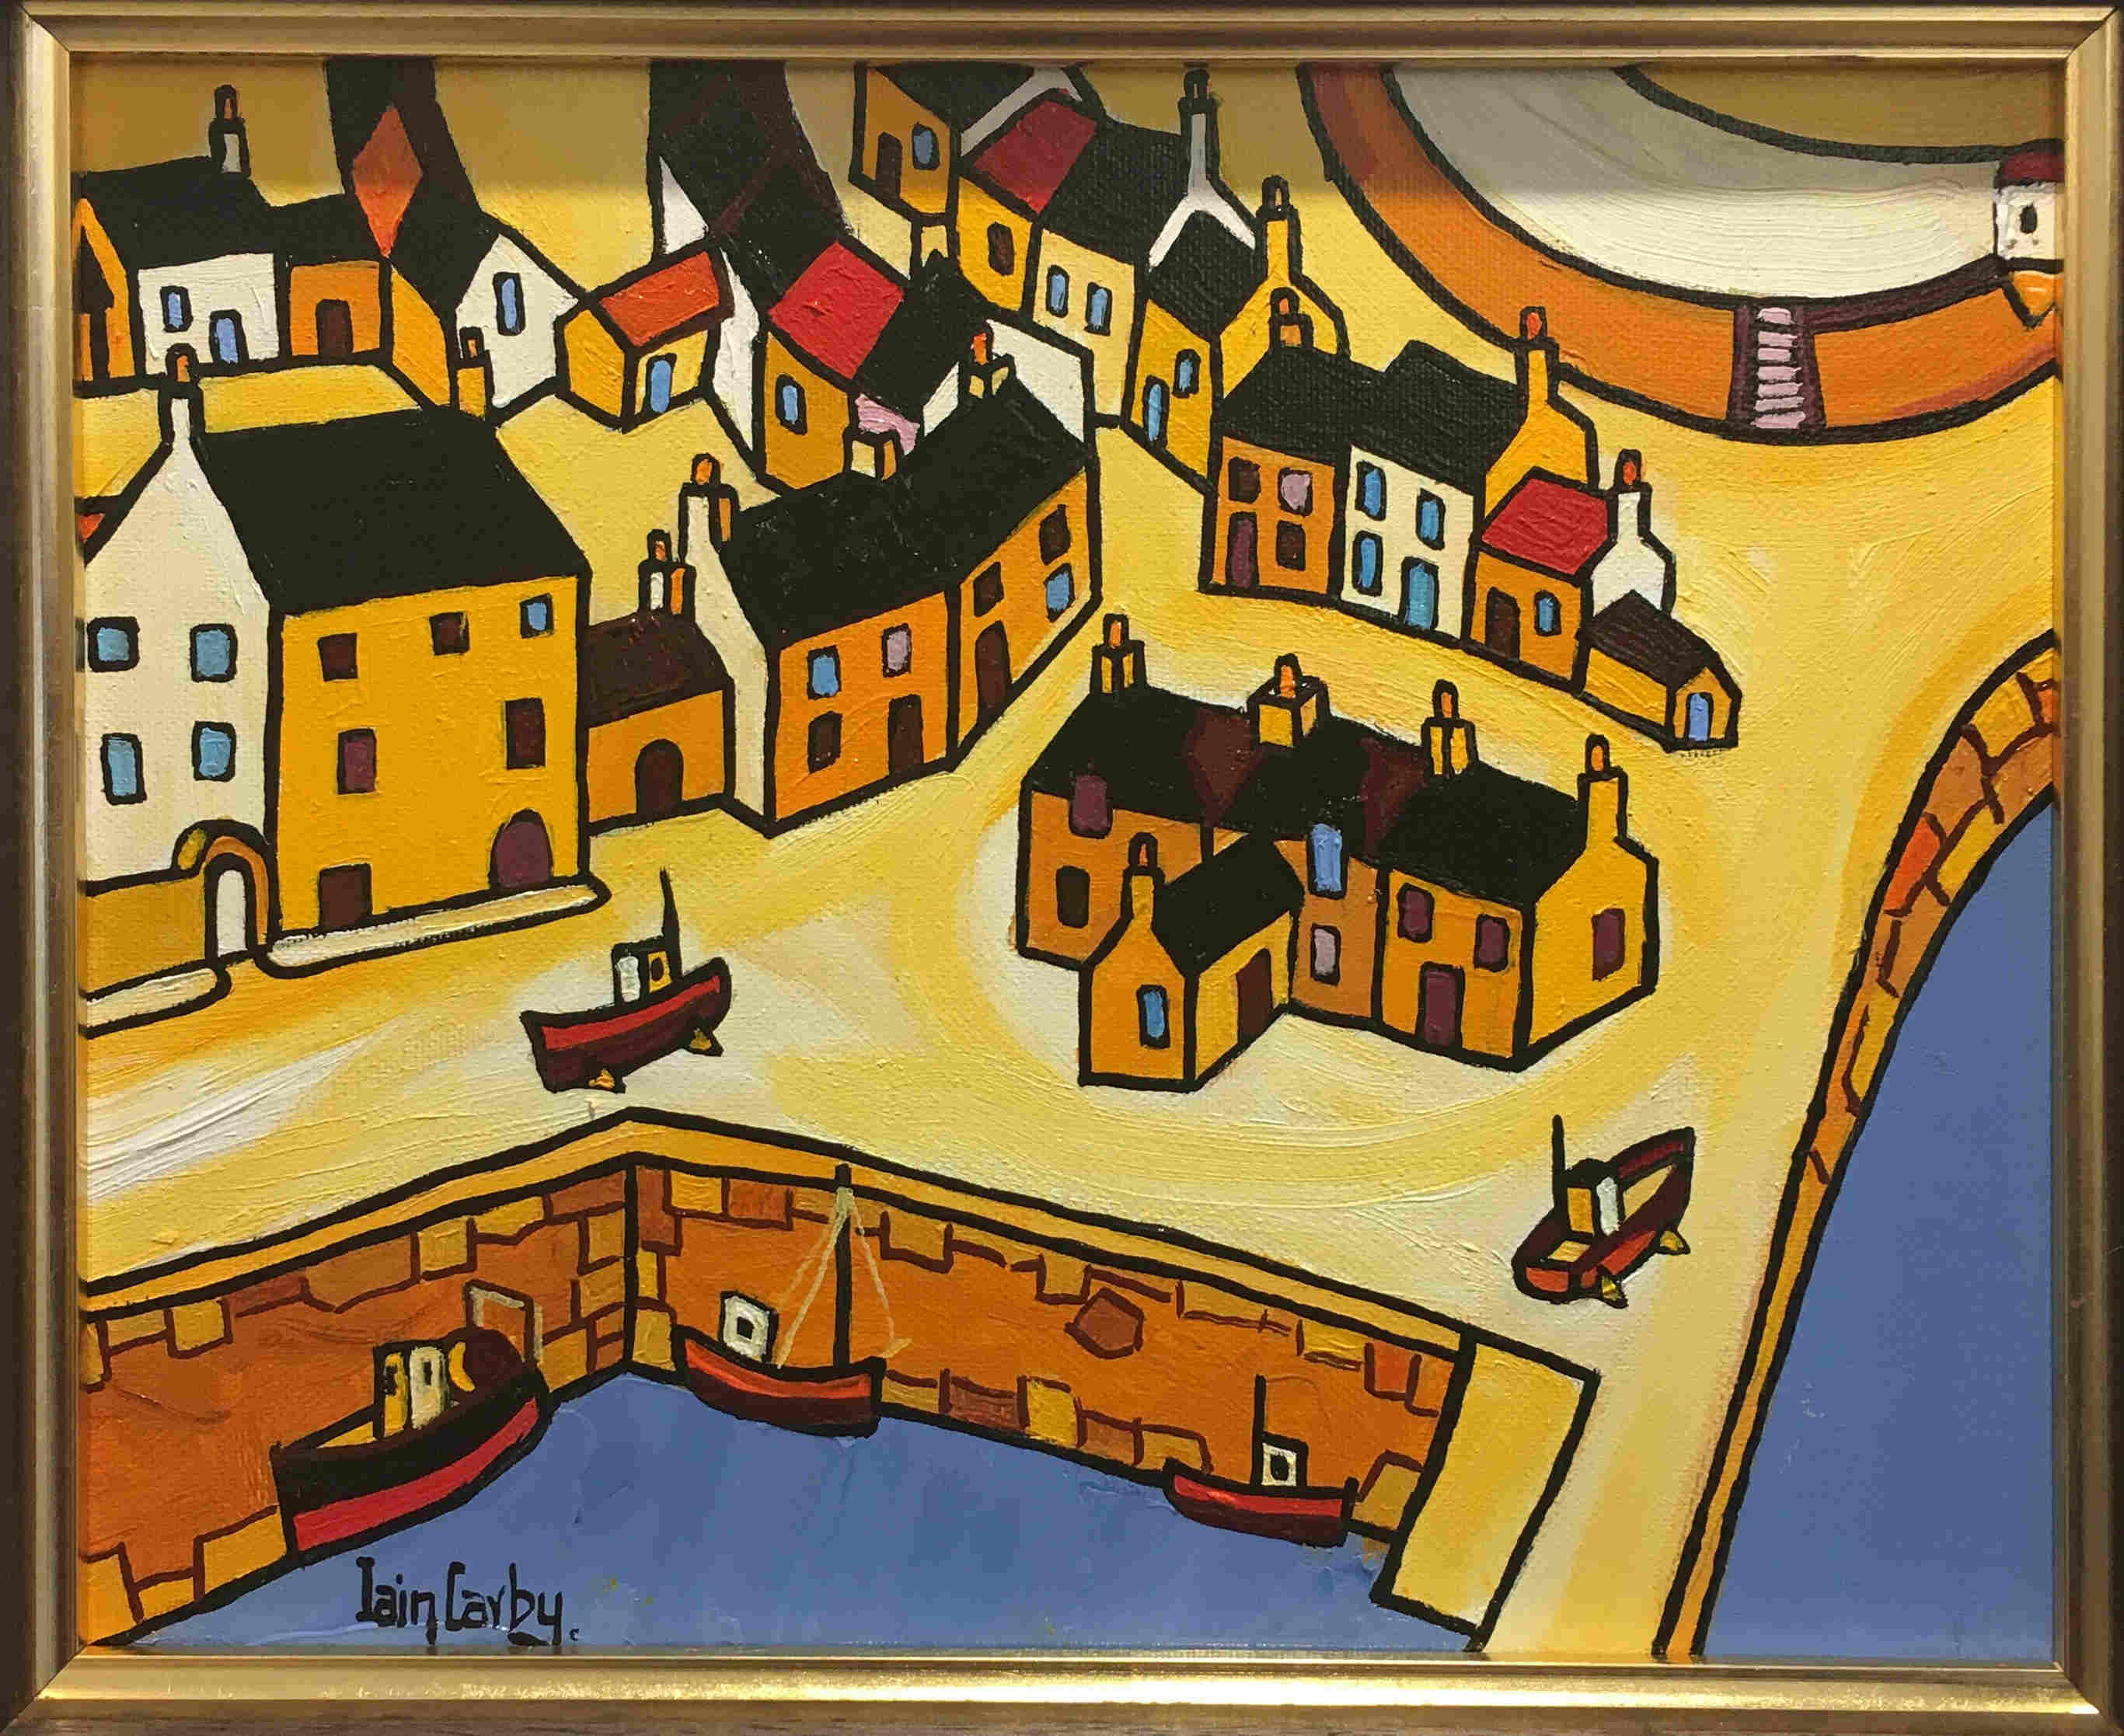 'Crail' by artist Iain Carby